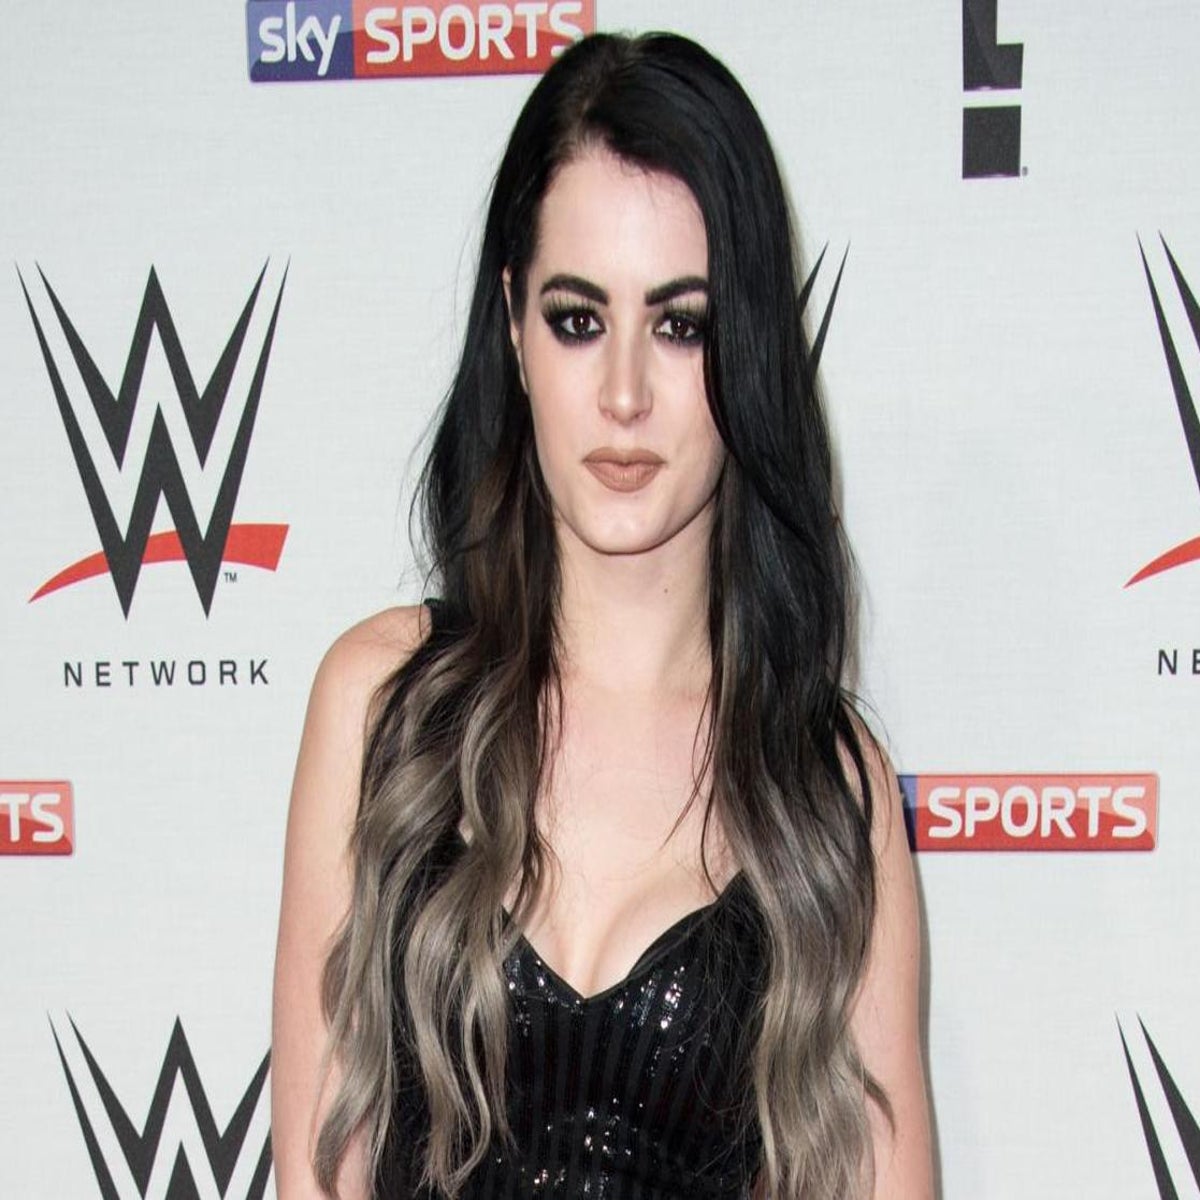 Sumalata Sexvideo - Paige sex tape leak caused WWE star to develop anorexia | The Independent